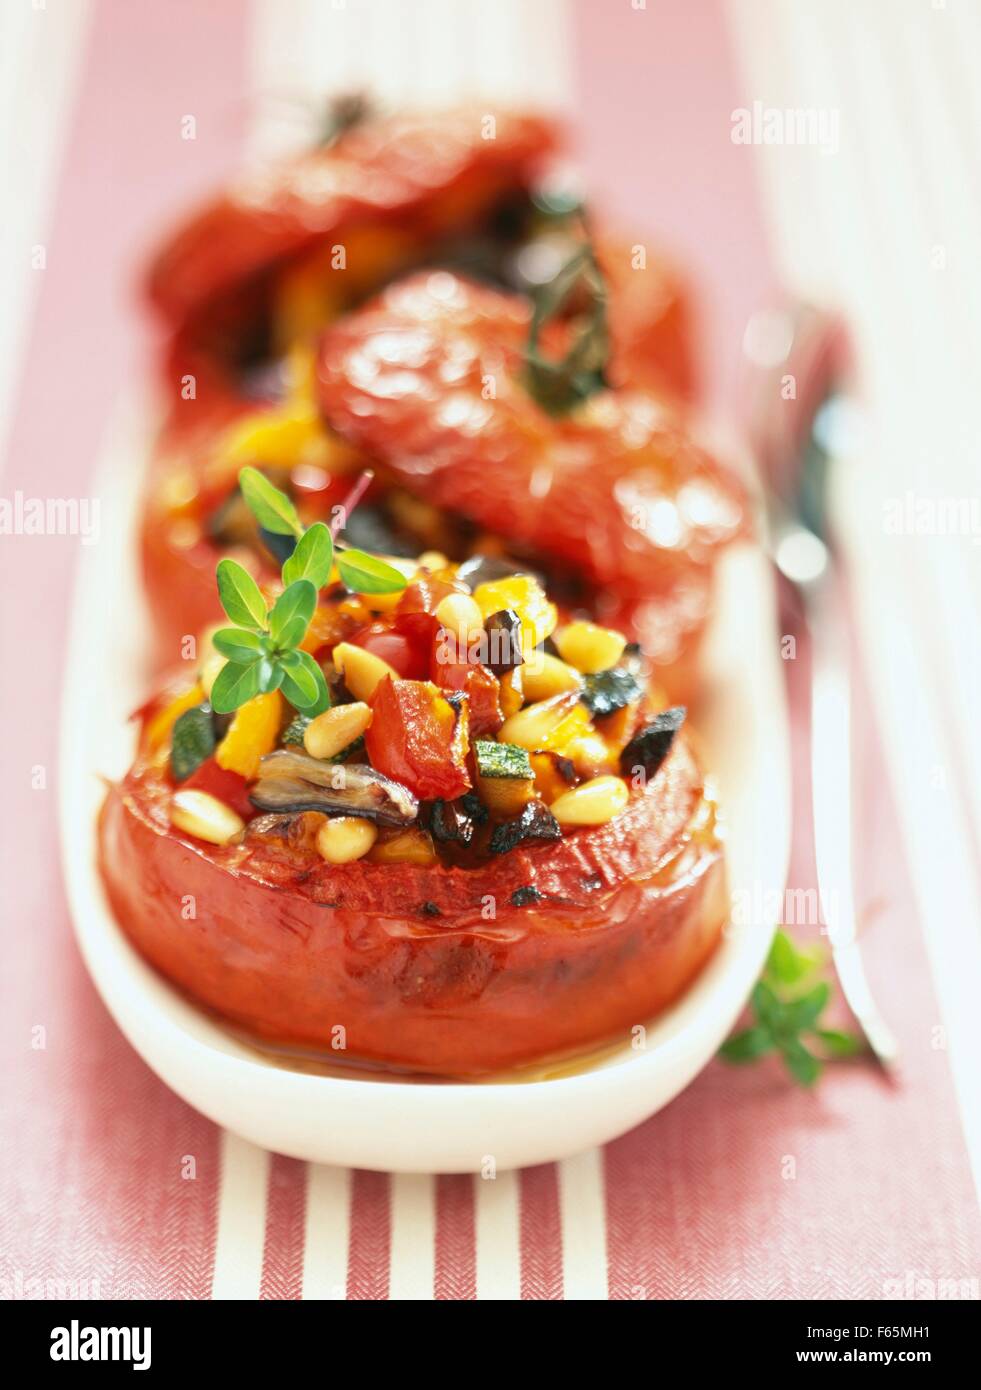 Tomatoes stuffed with grilled vegetables and pine nuts Stock Photo